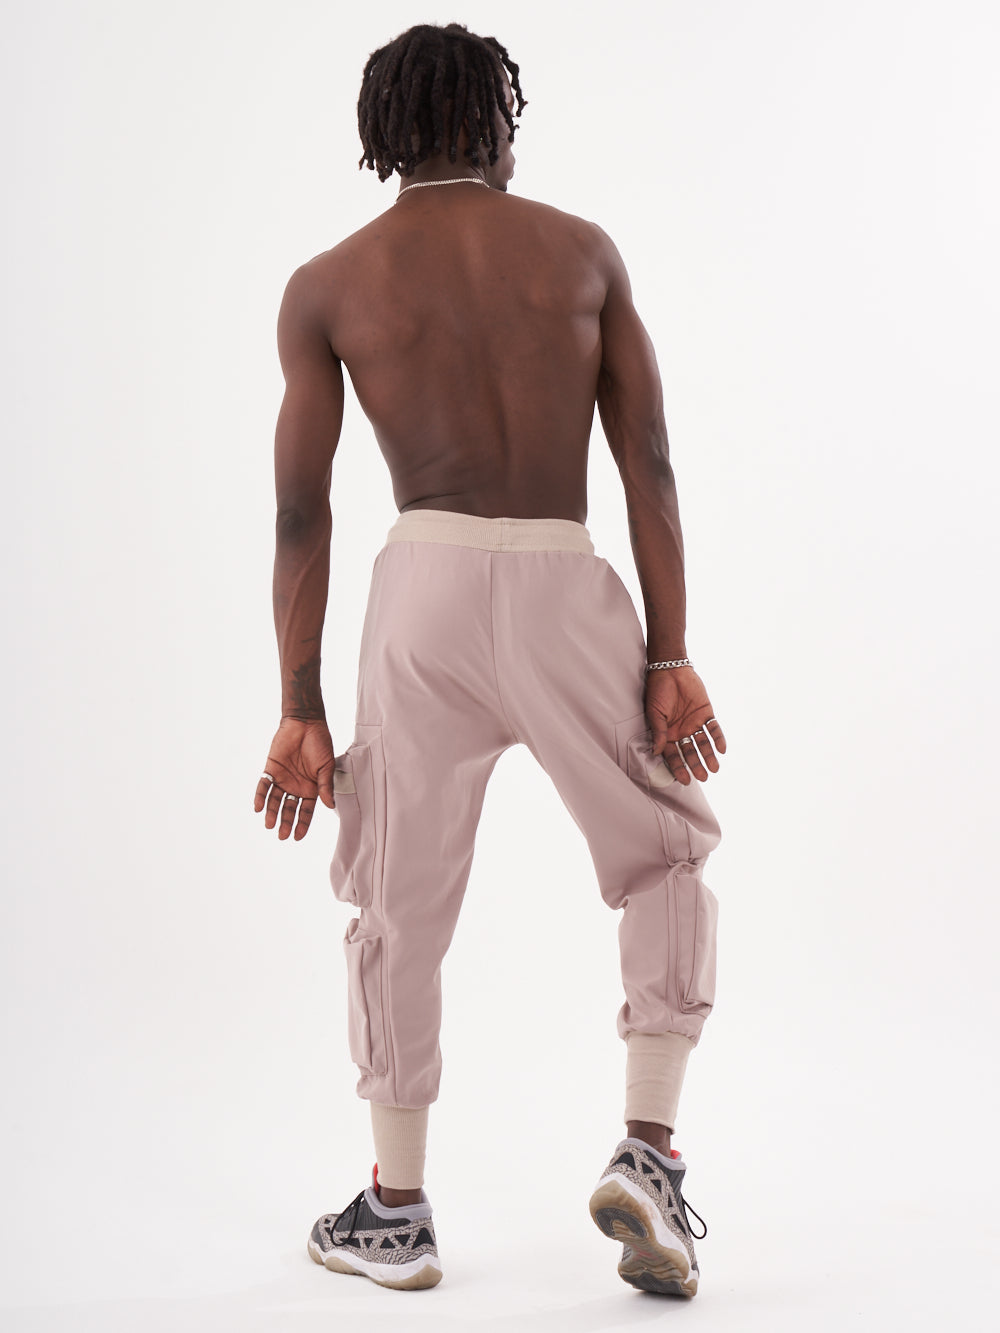 The back view of a man wearing OUTLIER | MAUVE joggers.